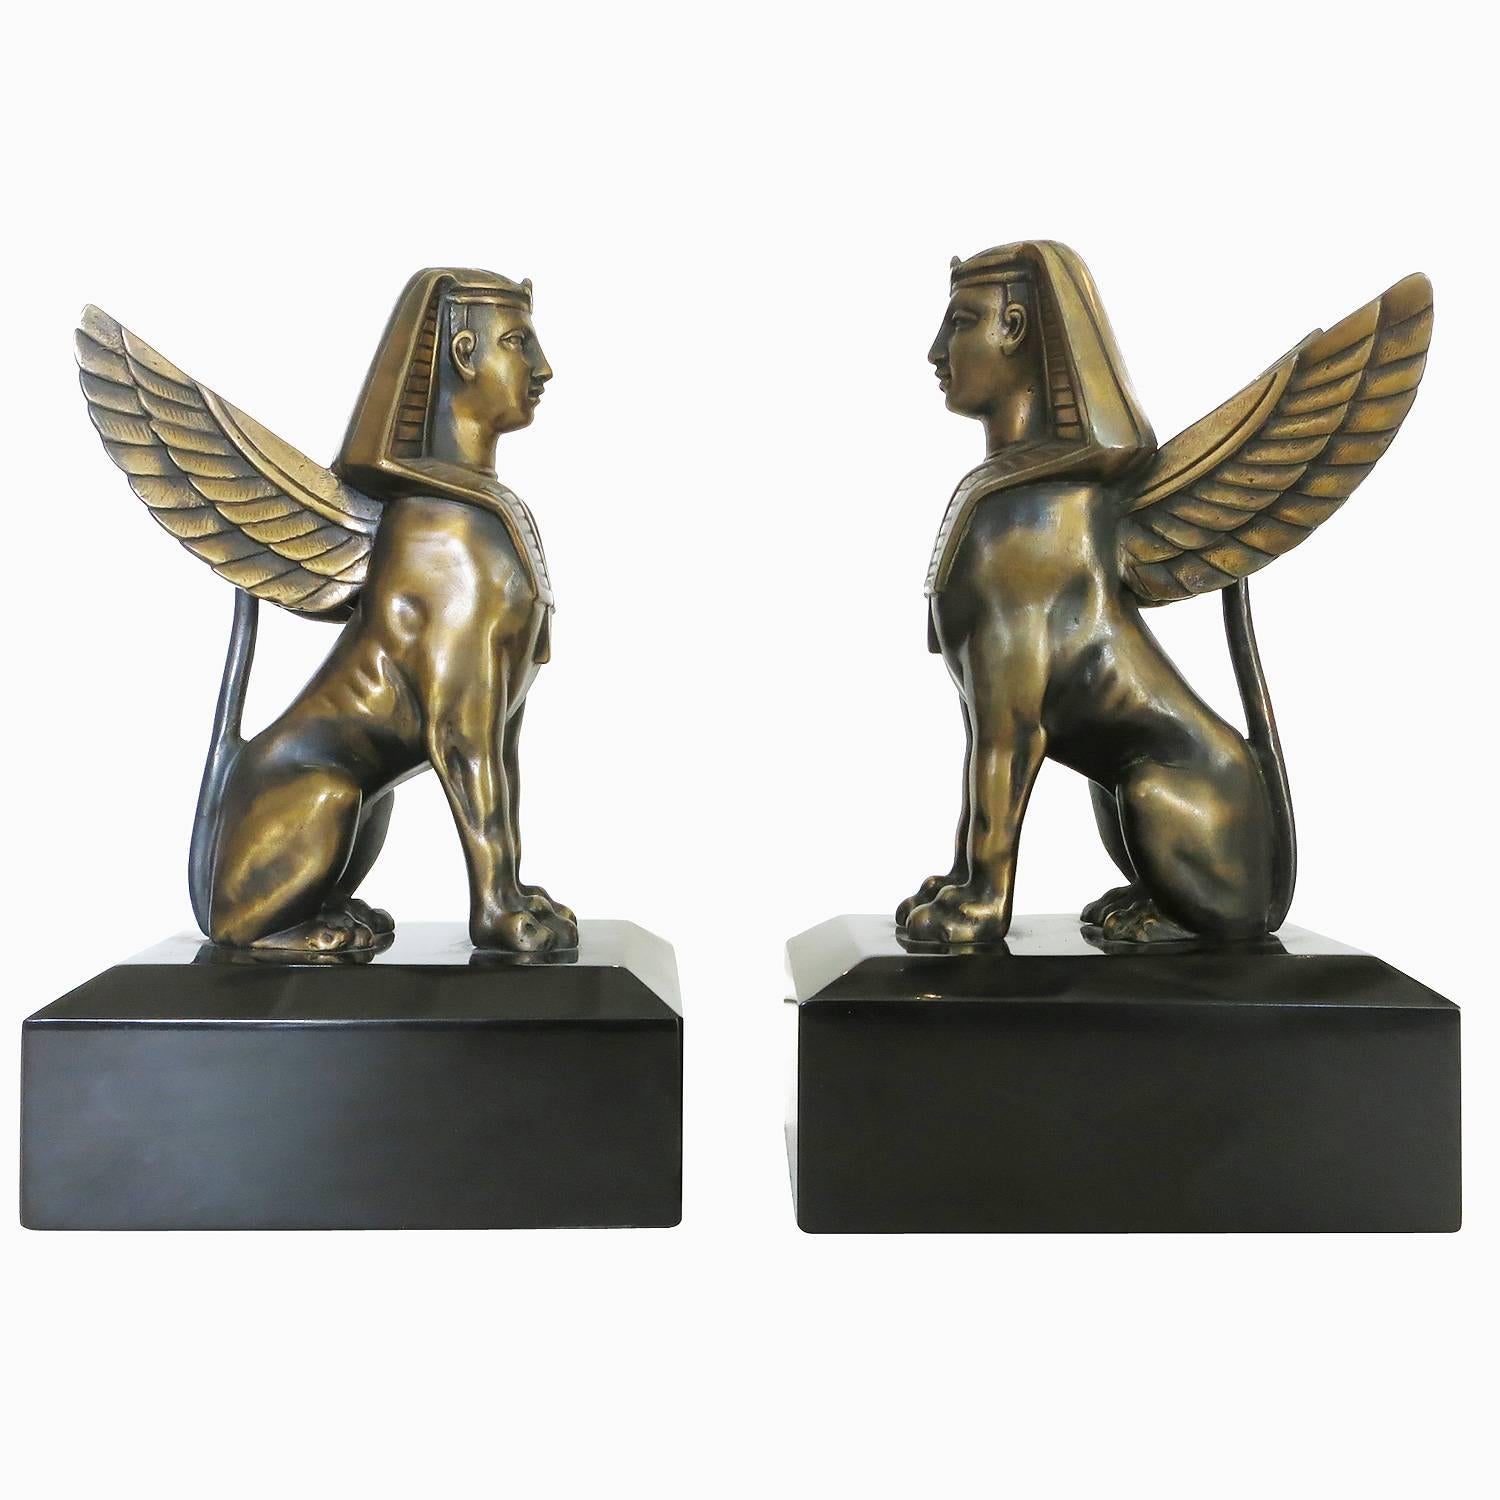 1920s inspired sculpture of sphinx solid bronze on absolute black marble. 

Could be used as bookends or figurine. Sold in pairs. 8.5